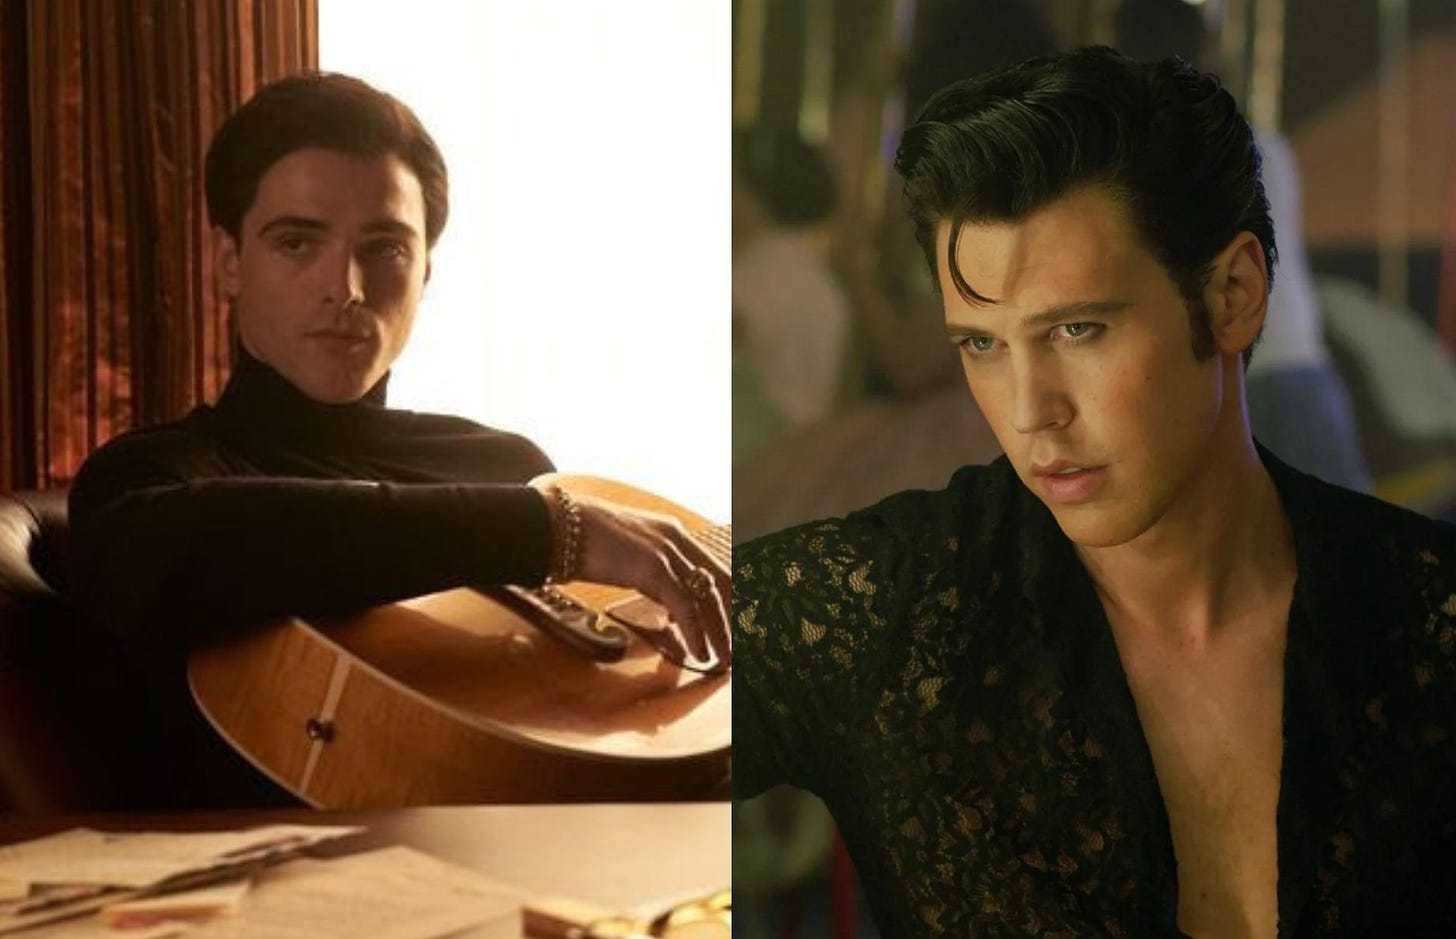 Comparison of Jacob Elordi and Austin Butler as Elvis Presley.